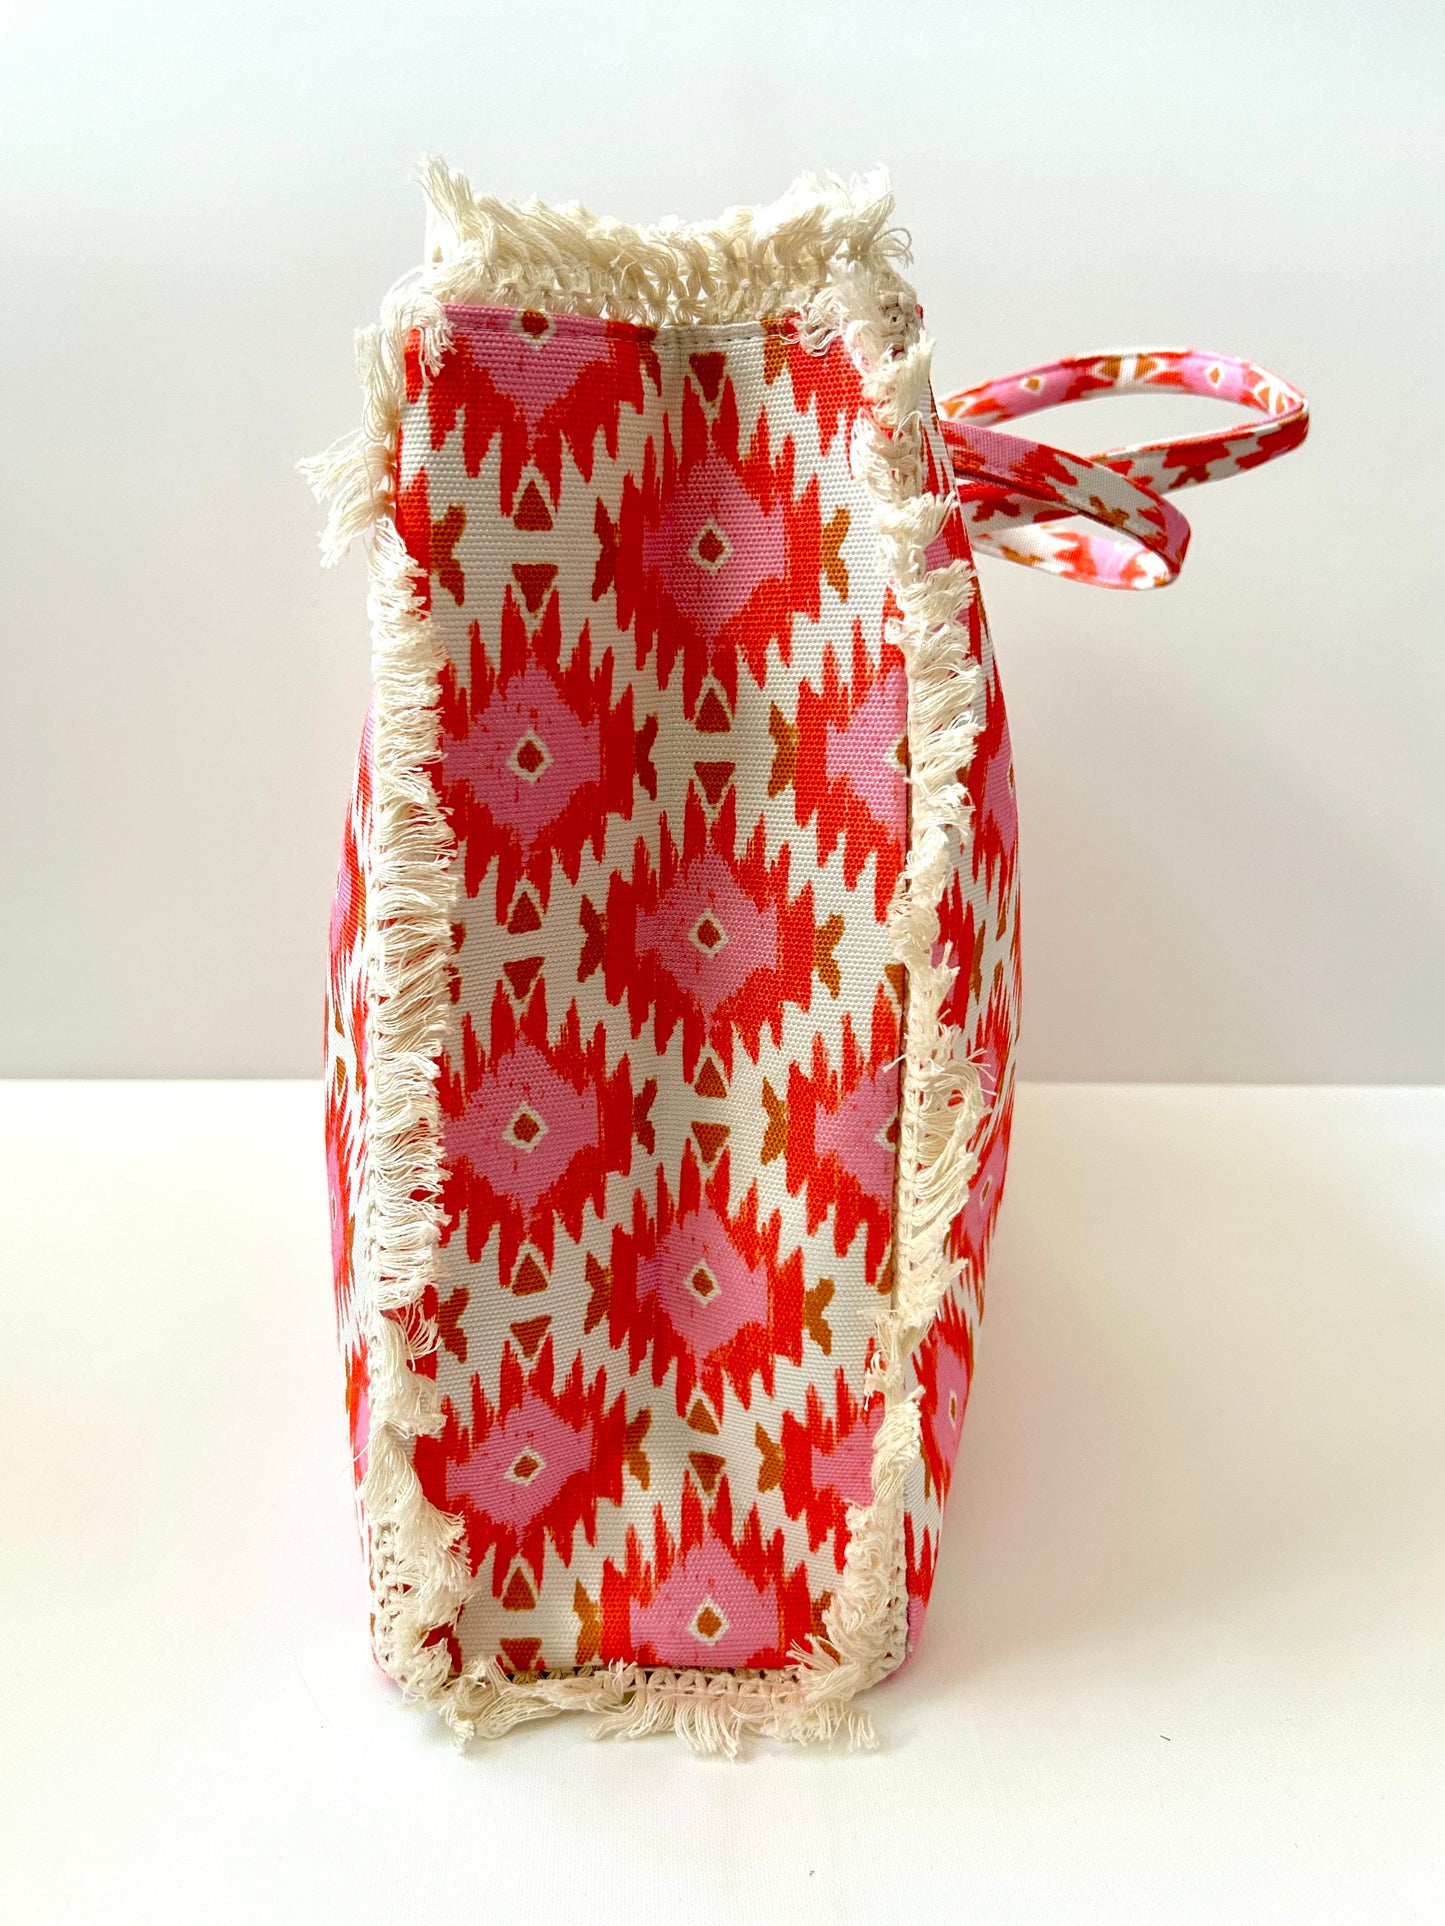 Bohemian Tote Bag with Fringe - Pink + Red